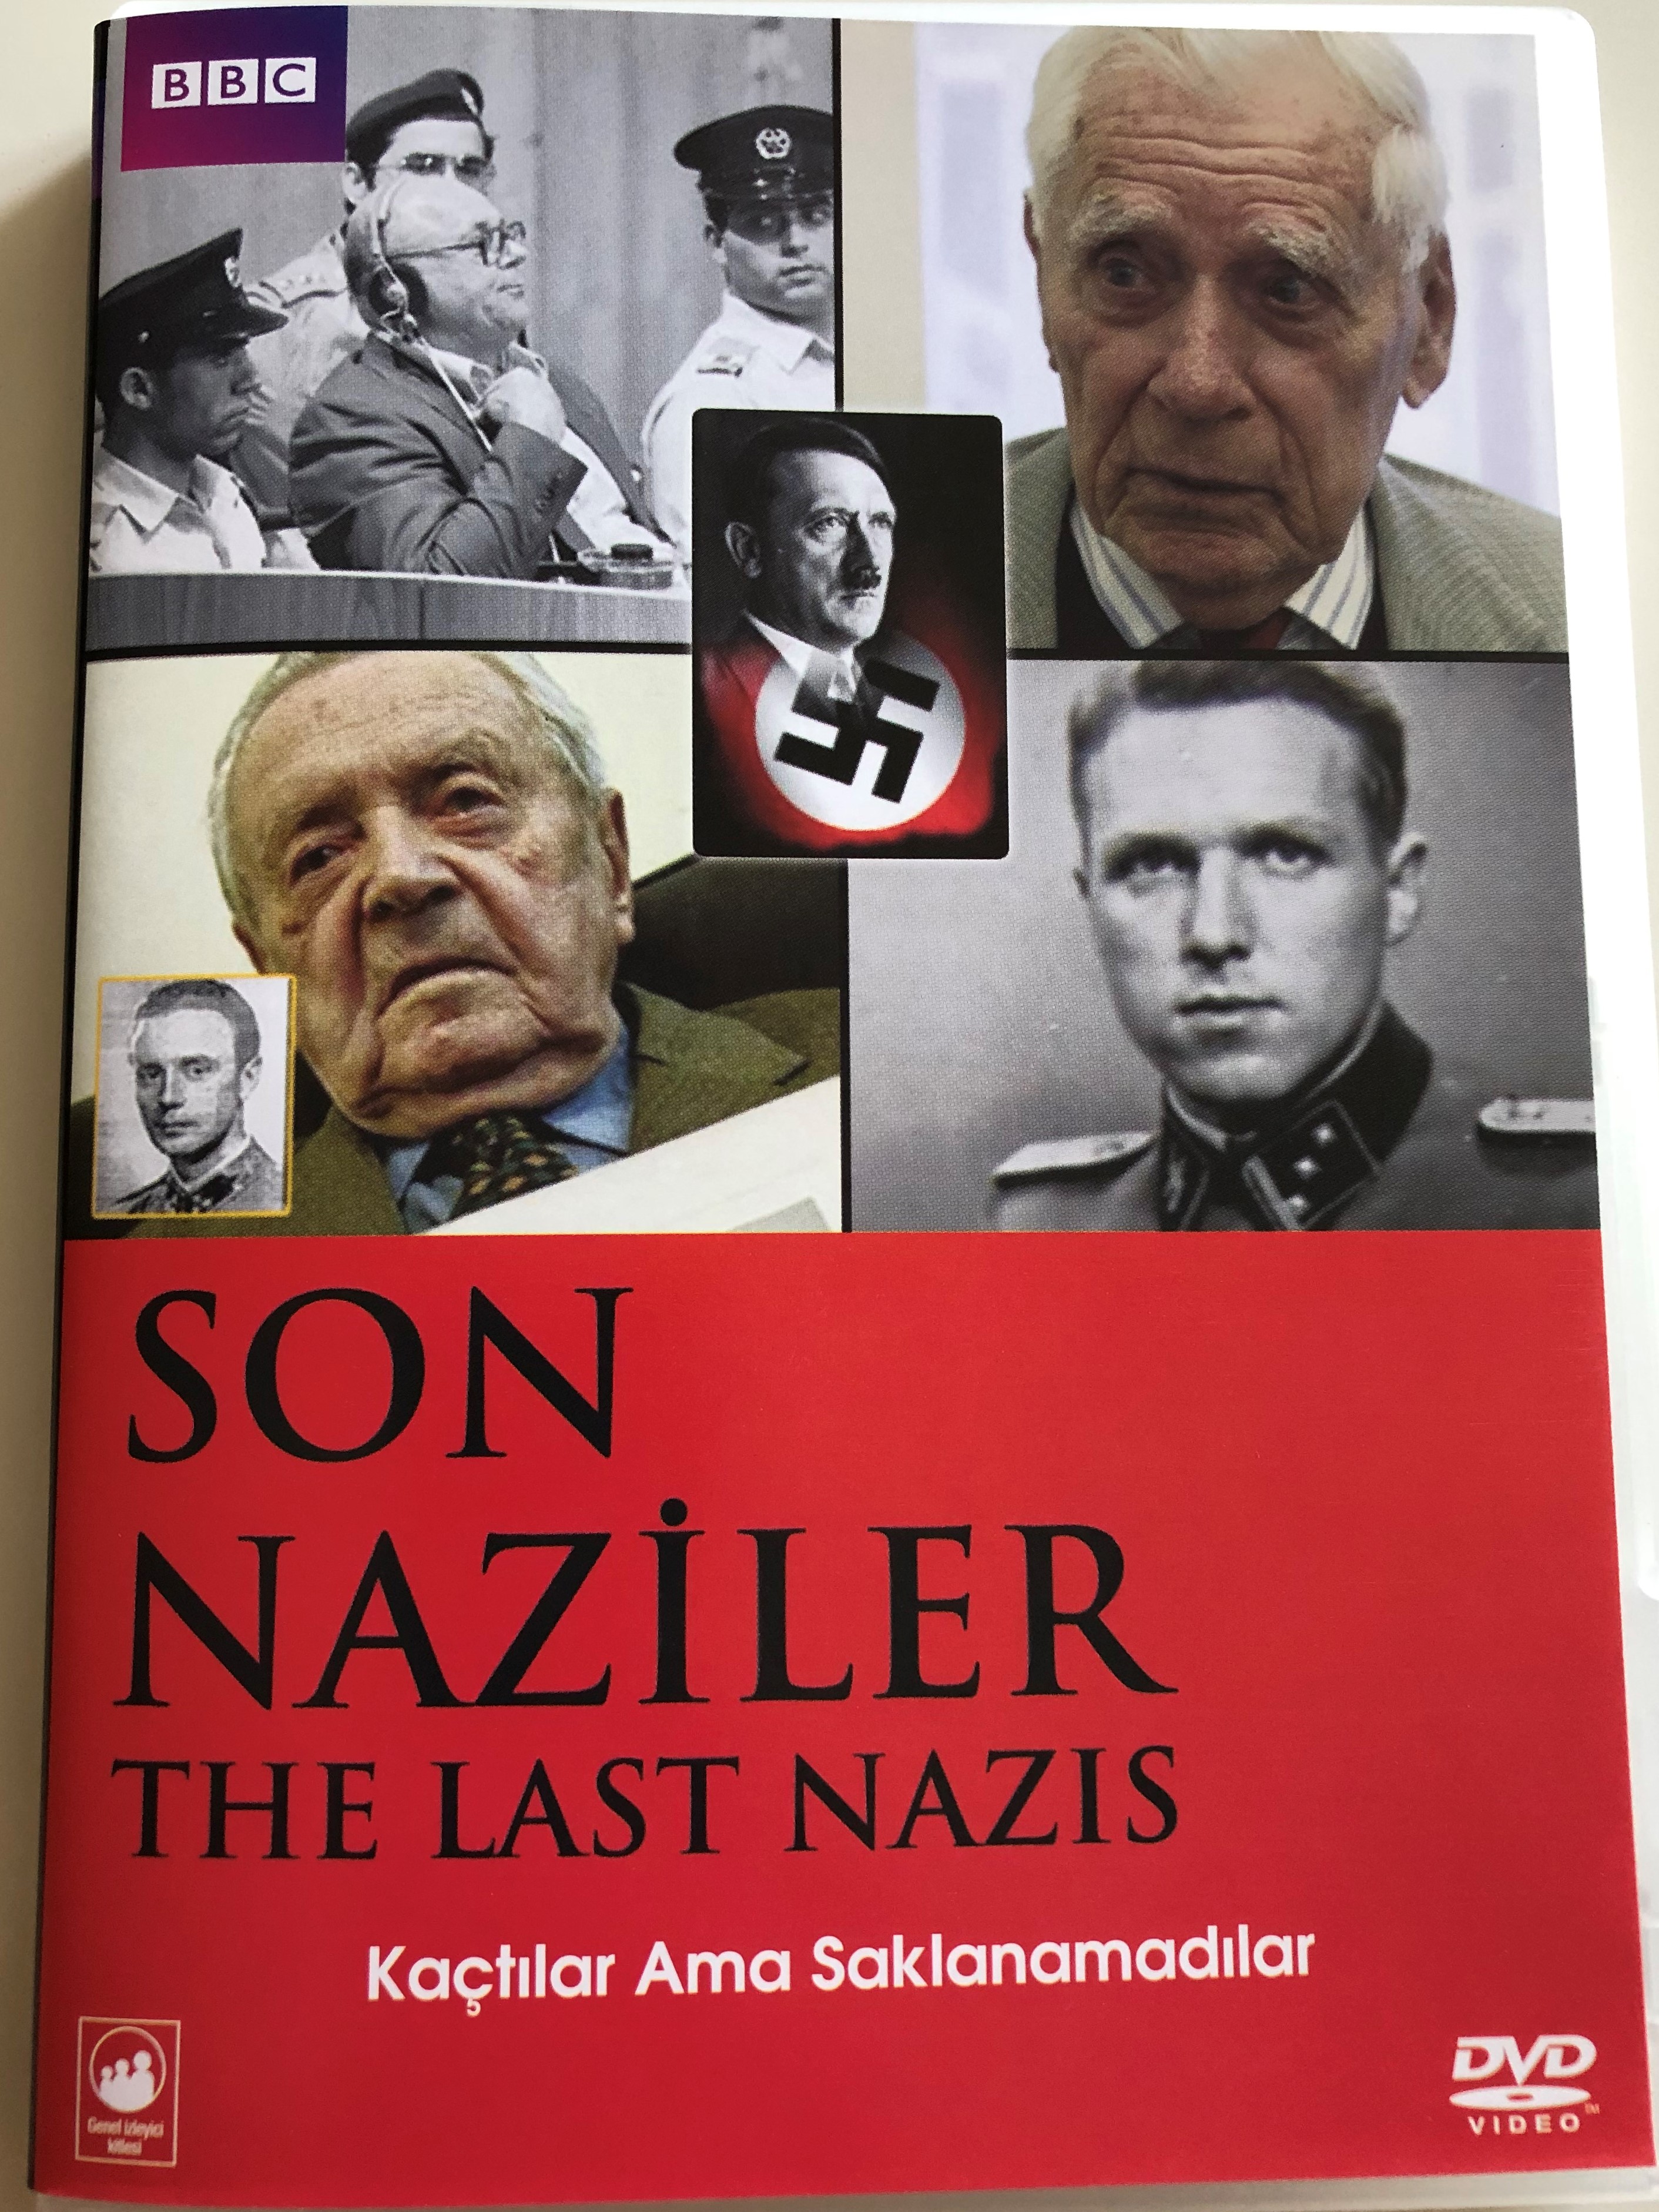 son-naziler-dvd-2009-the-last-nazis-bbc-3-part-documentary-about-the-last-remaining-nazi-war-criminals-narrated-by-david-morrissey-1-.jpg